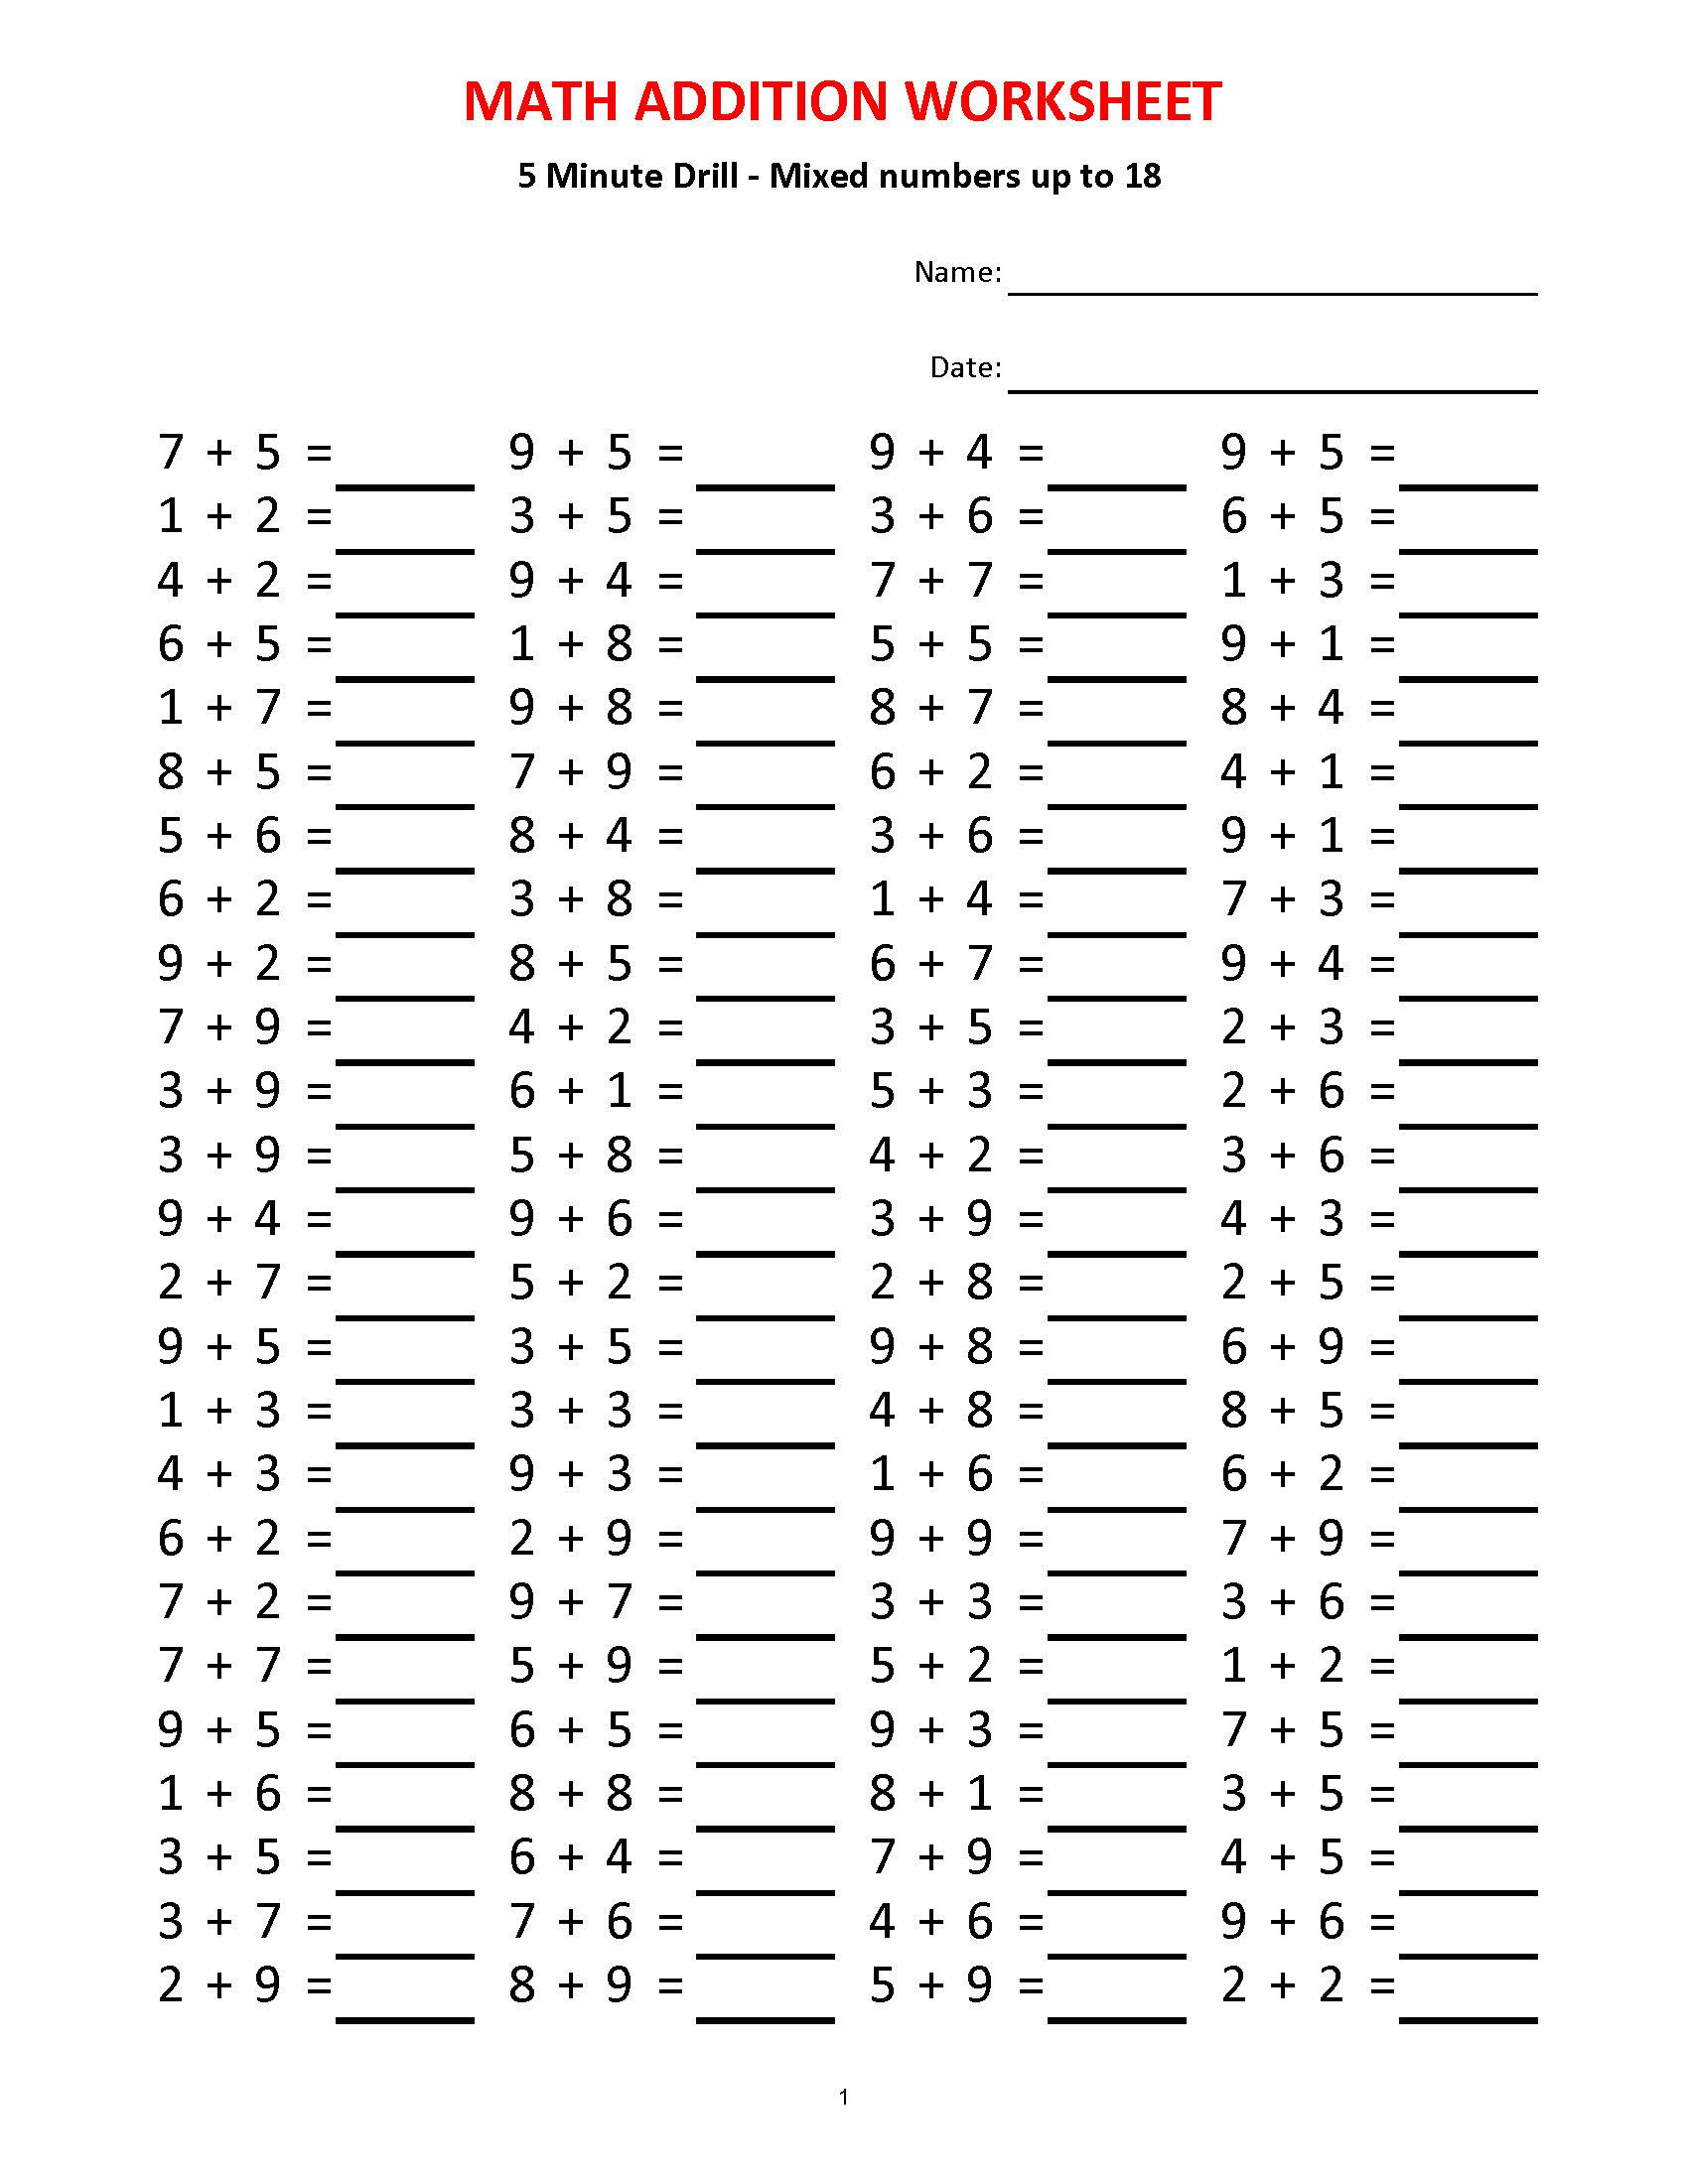 multiplication-speed-drills-100-daily-timed-math-speed-tests-multiplication-drills-1-12-times